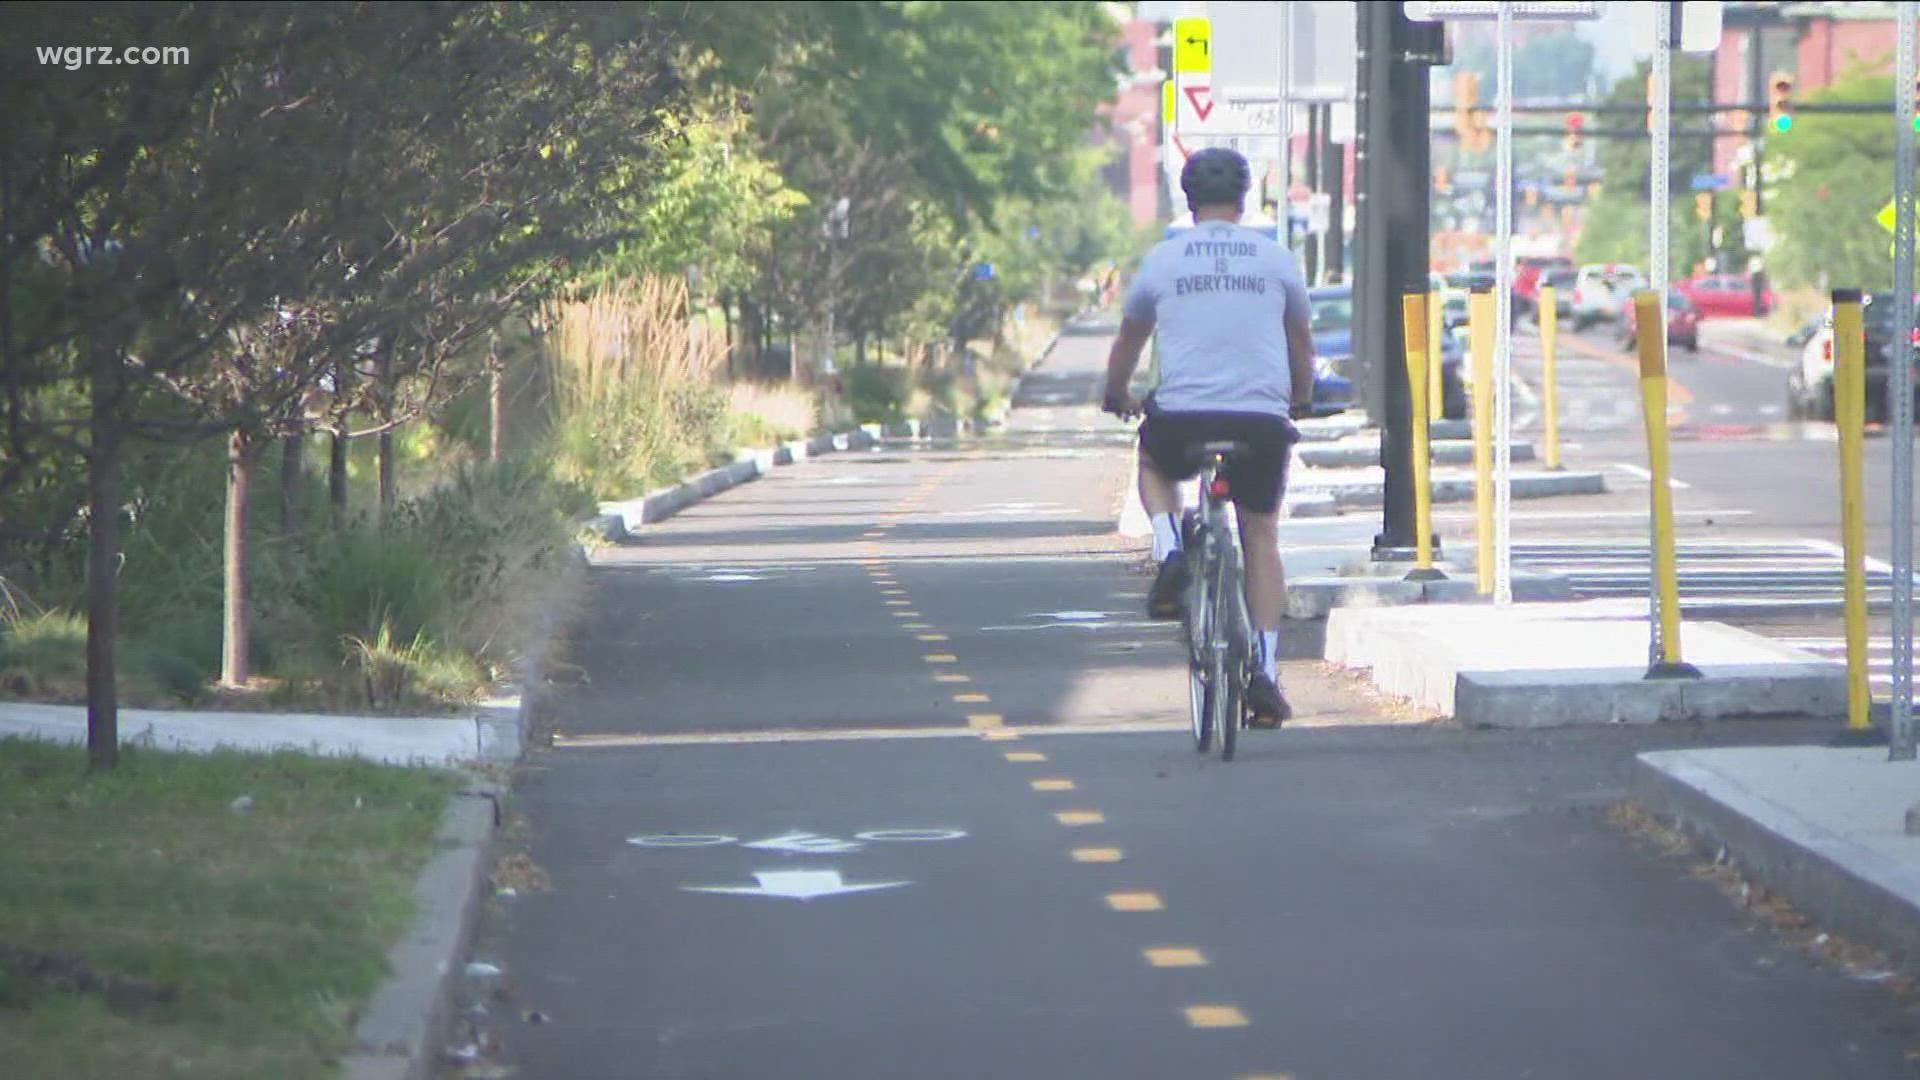 The Buffalo Common Council has passed an amendment to existing traffic laws. It's now illegal to park a vehicle on a marked bicycle lane in the city.